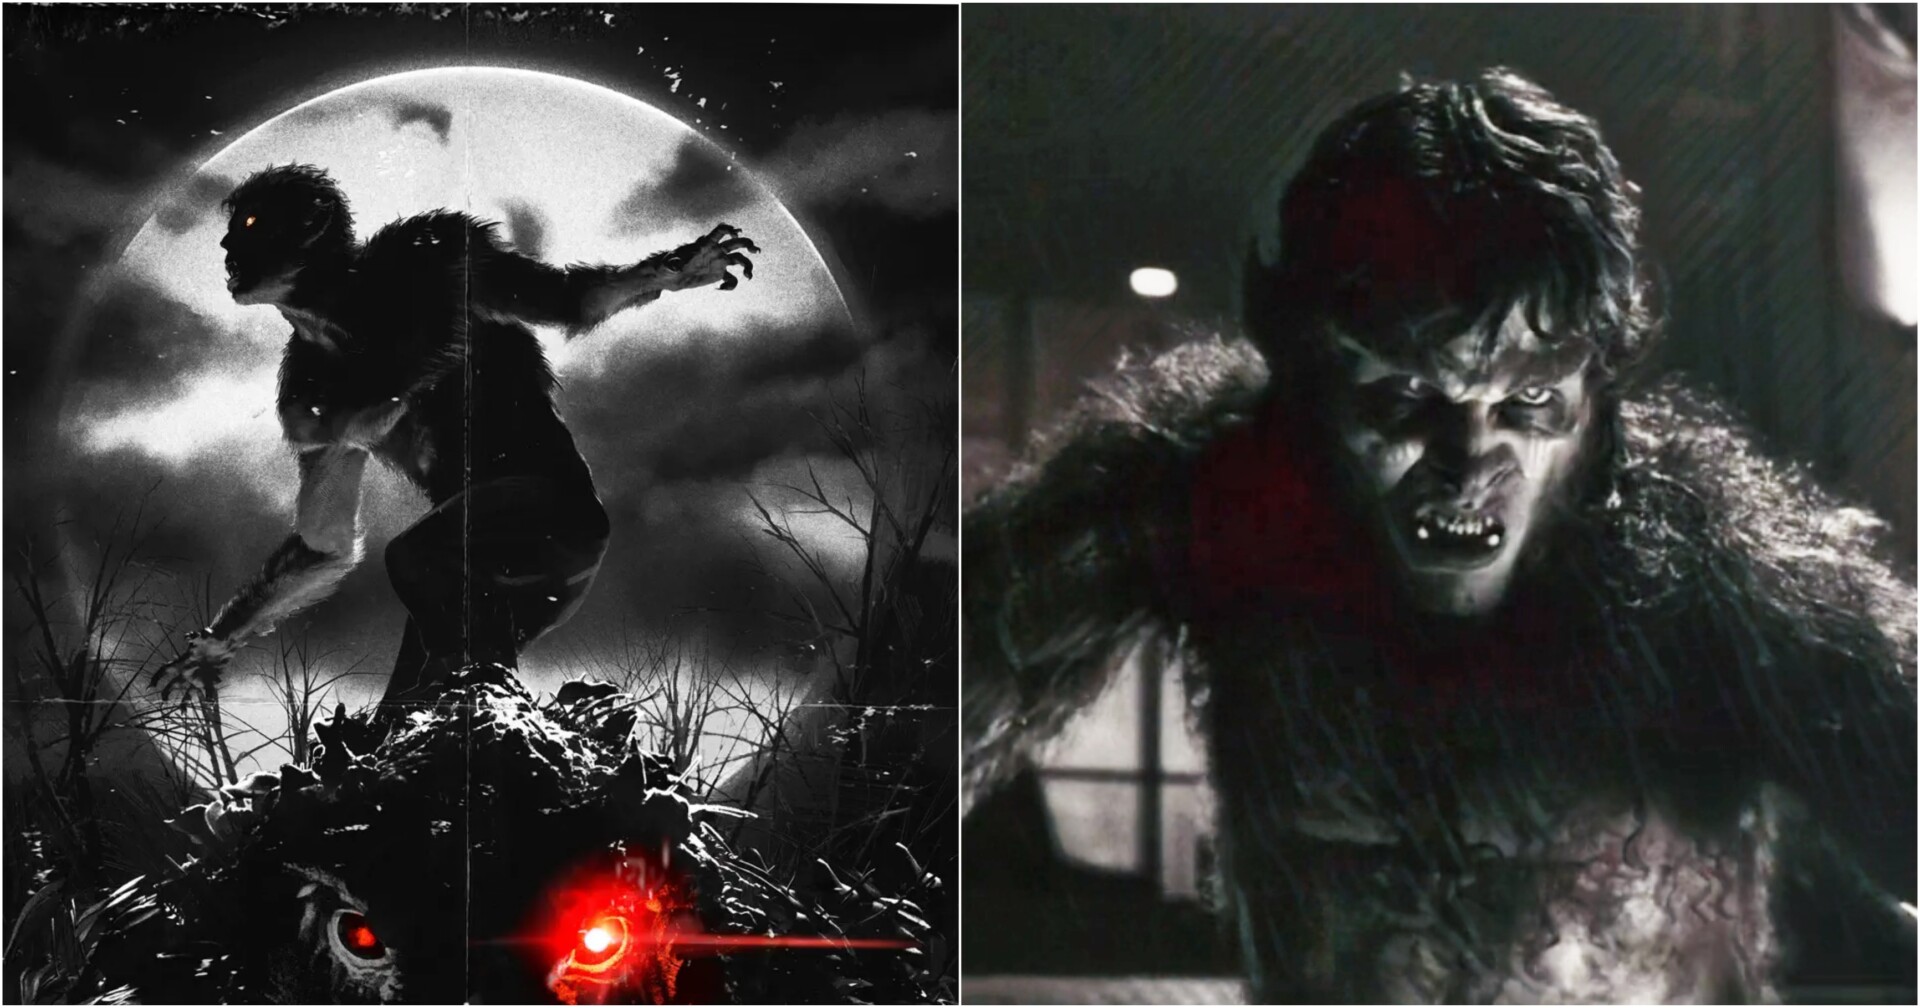 marvel - What are the monster heads in Werewolf by Night? - Science Fiction  & Fantasy Stack Exchange